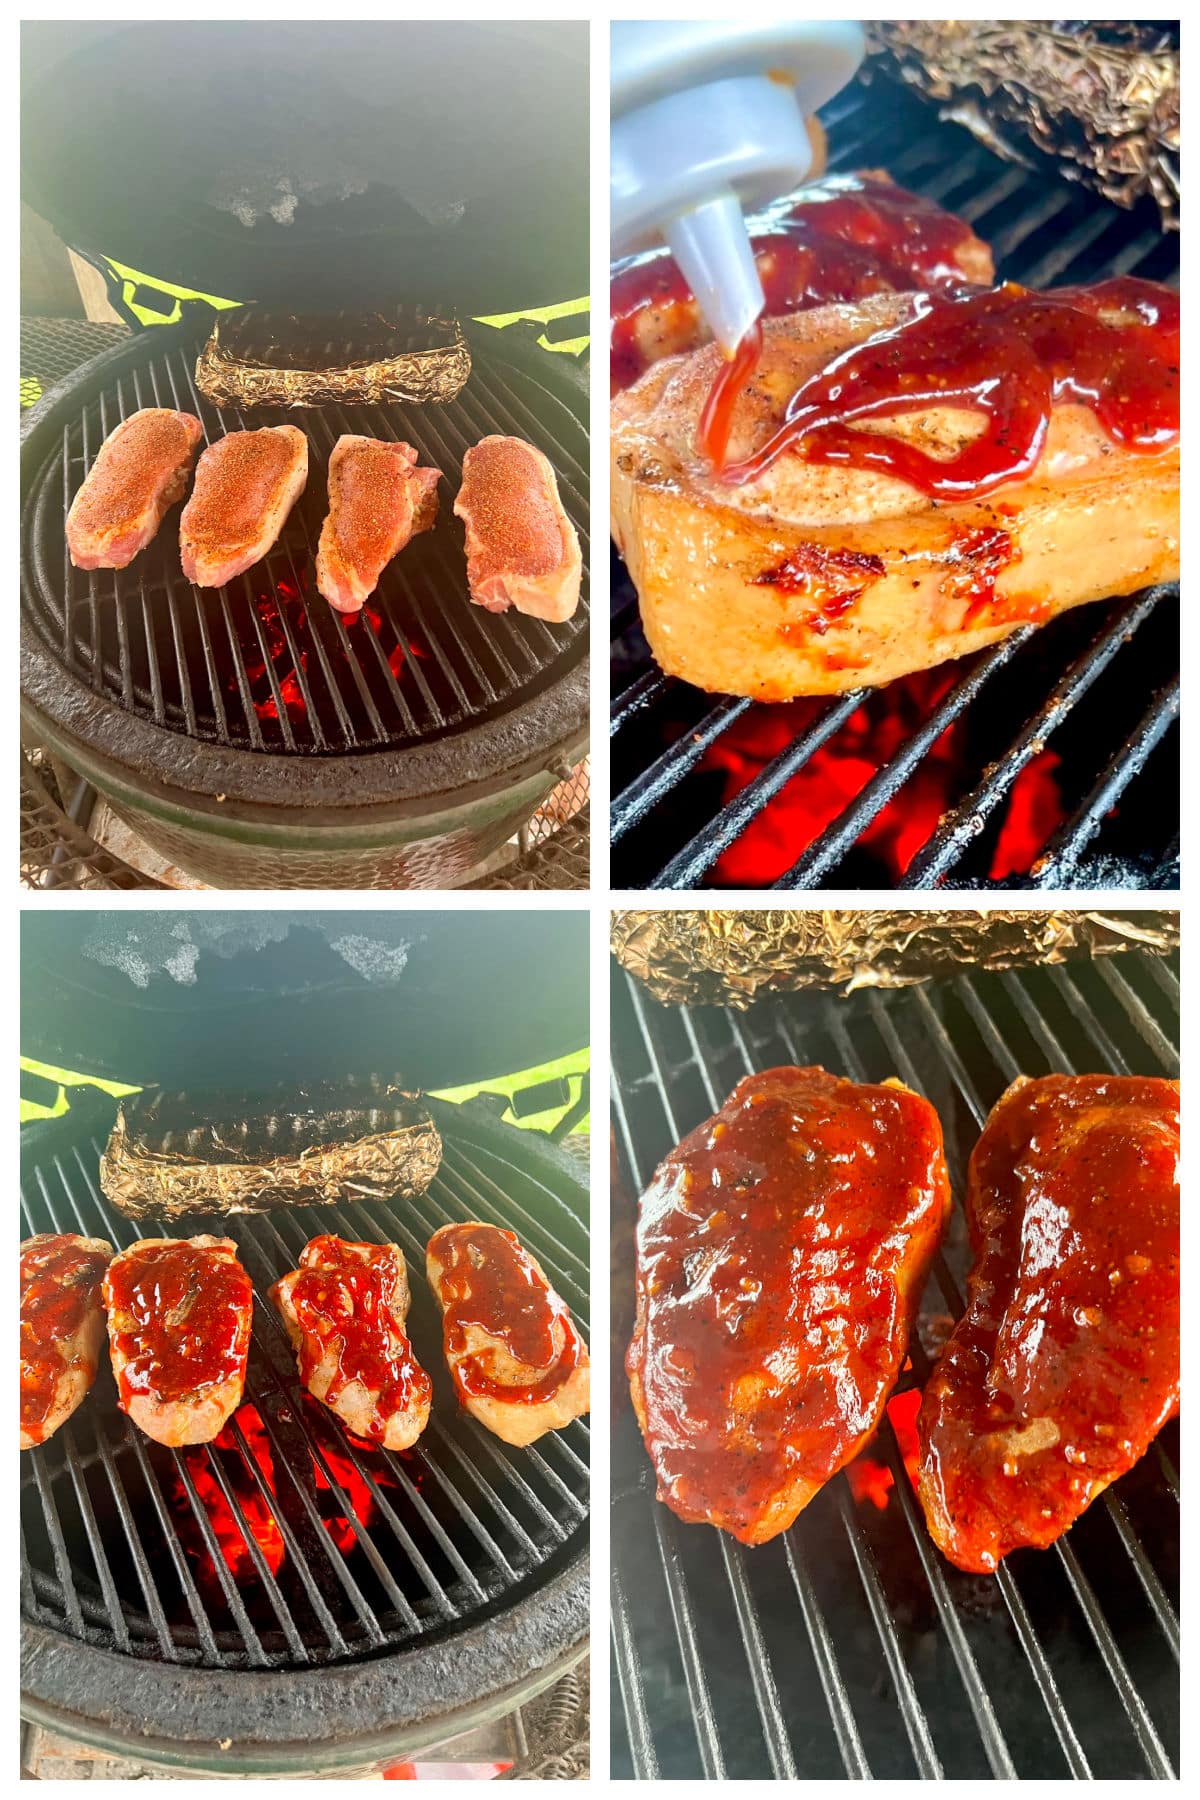 Collage: grilling stuffed pork chops with bbq sauce.